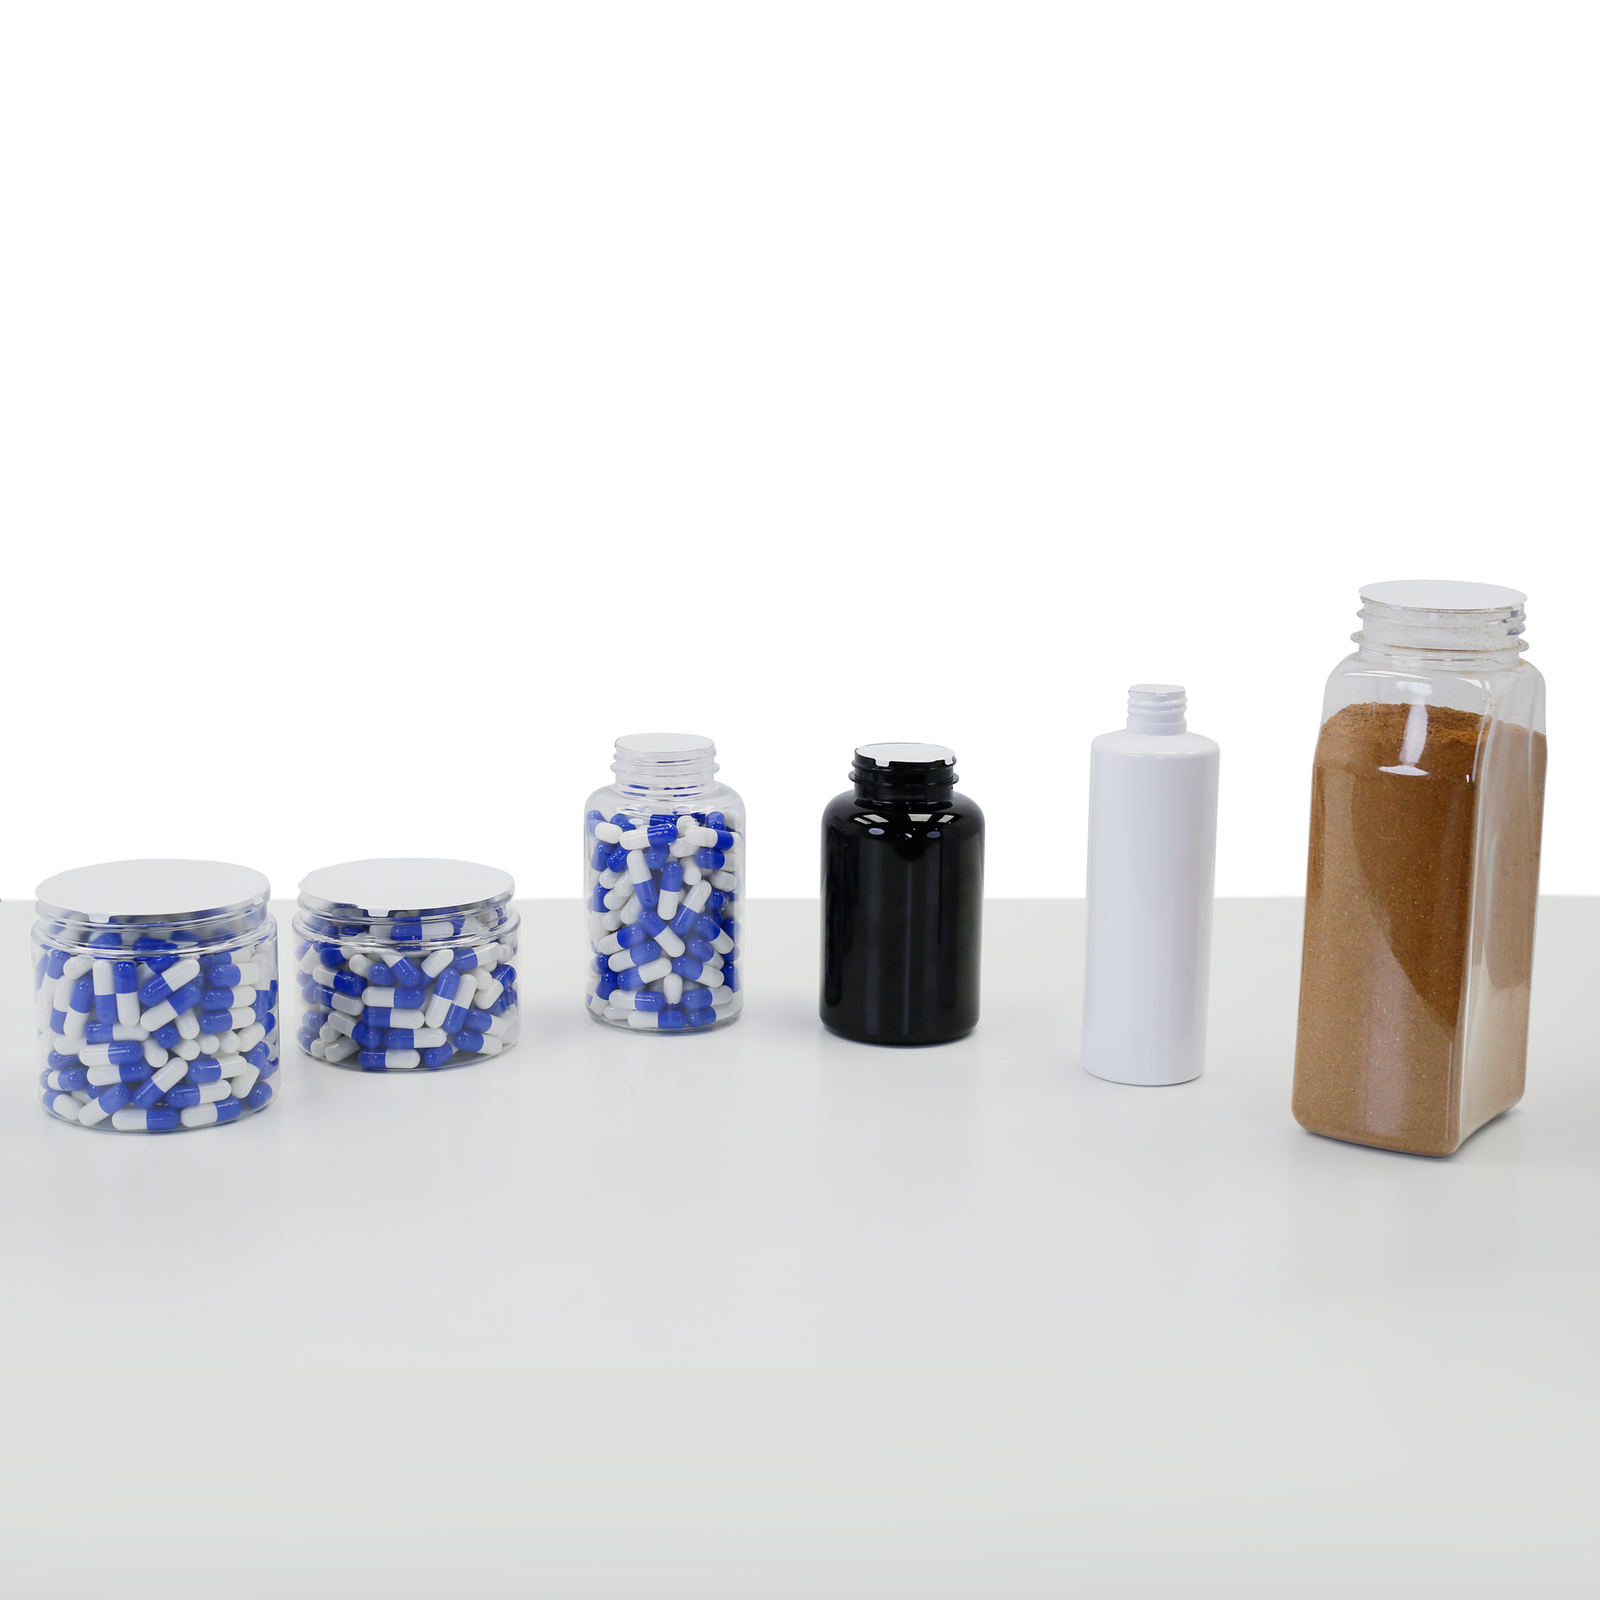 A collection of containers of different sized which have been sealed with induction liners using the Jorestech electromagnetic cap sealer